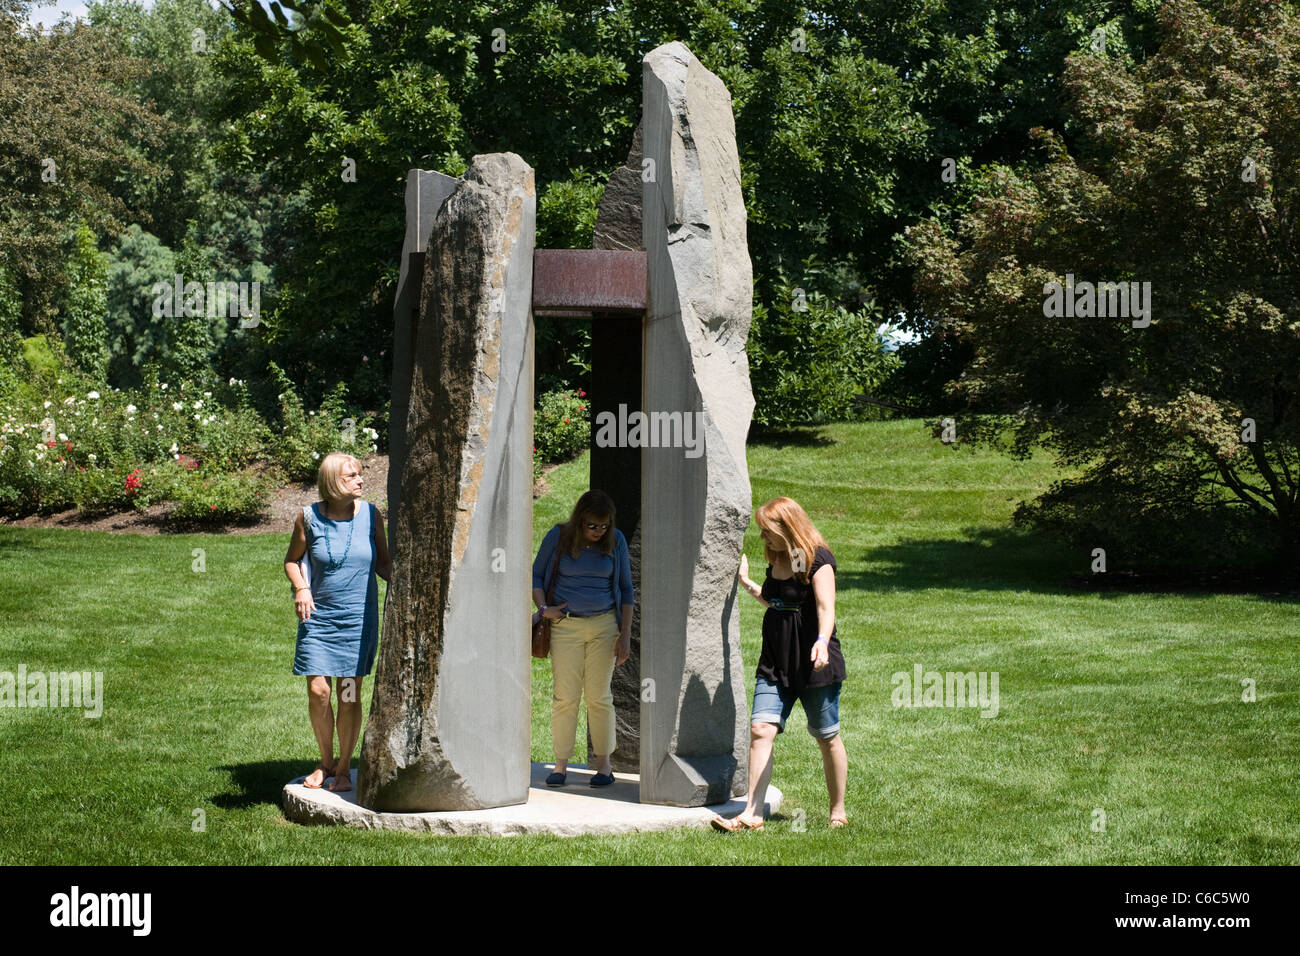 Grounds for Sculpture, Trenton, New Jersey Stock Photo